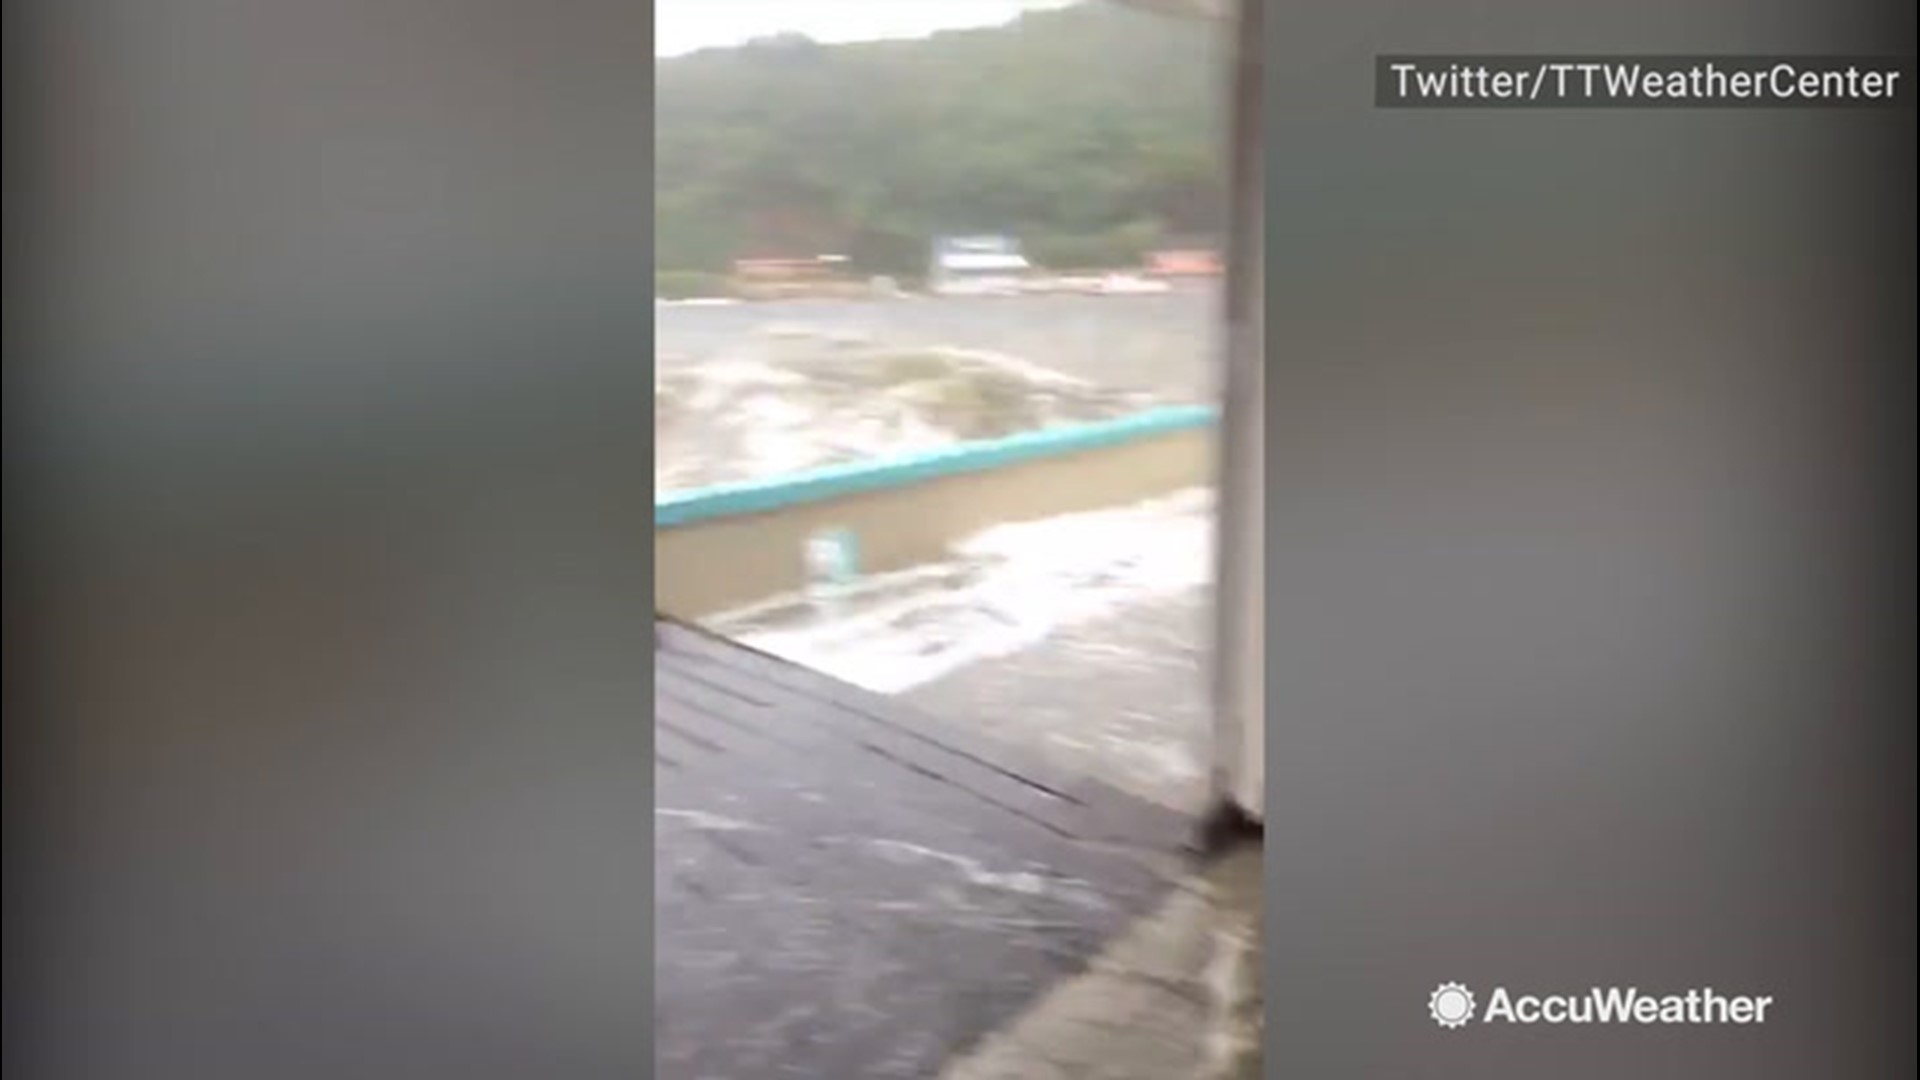 Tropical Depression Karen is creating some rough seas in the Caribbean on Sept. 22, such as in North West Coast of Trinidad, where water is hurled at the videographer!